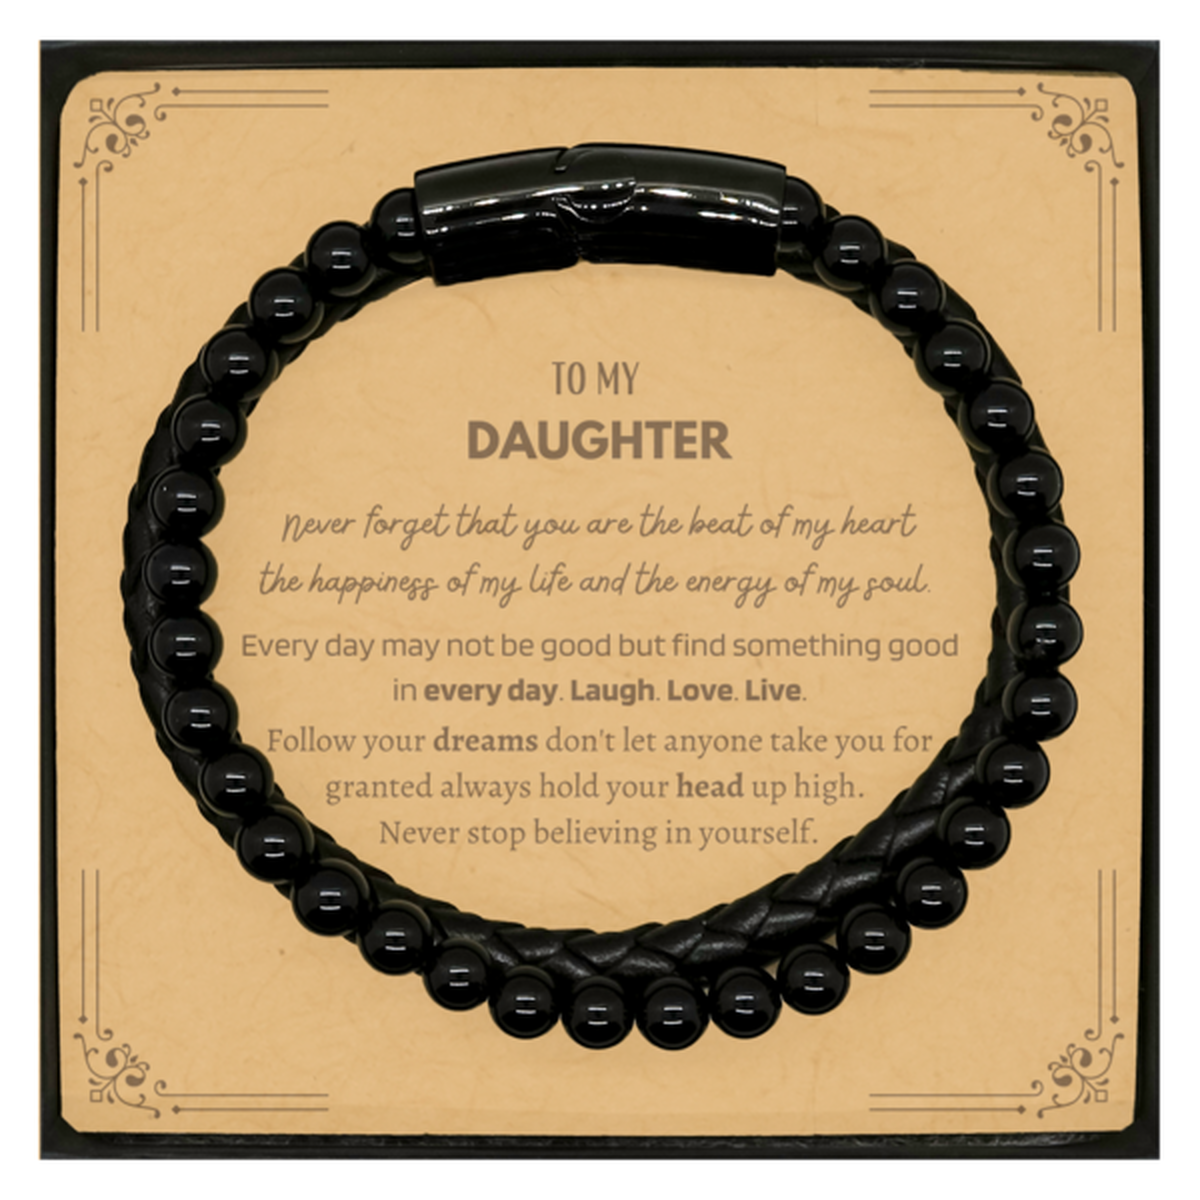 To My Daughter Message Card Gifts, Christmas Daughter Stone Leather Bracelets Present, Birthday Unique Motivational For Daughter, To My Daughter Never forget that you are the beat of my heart the happiness of my life and the energy of my soul